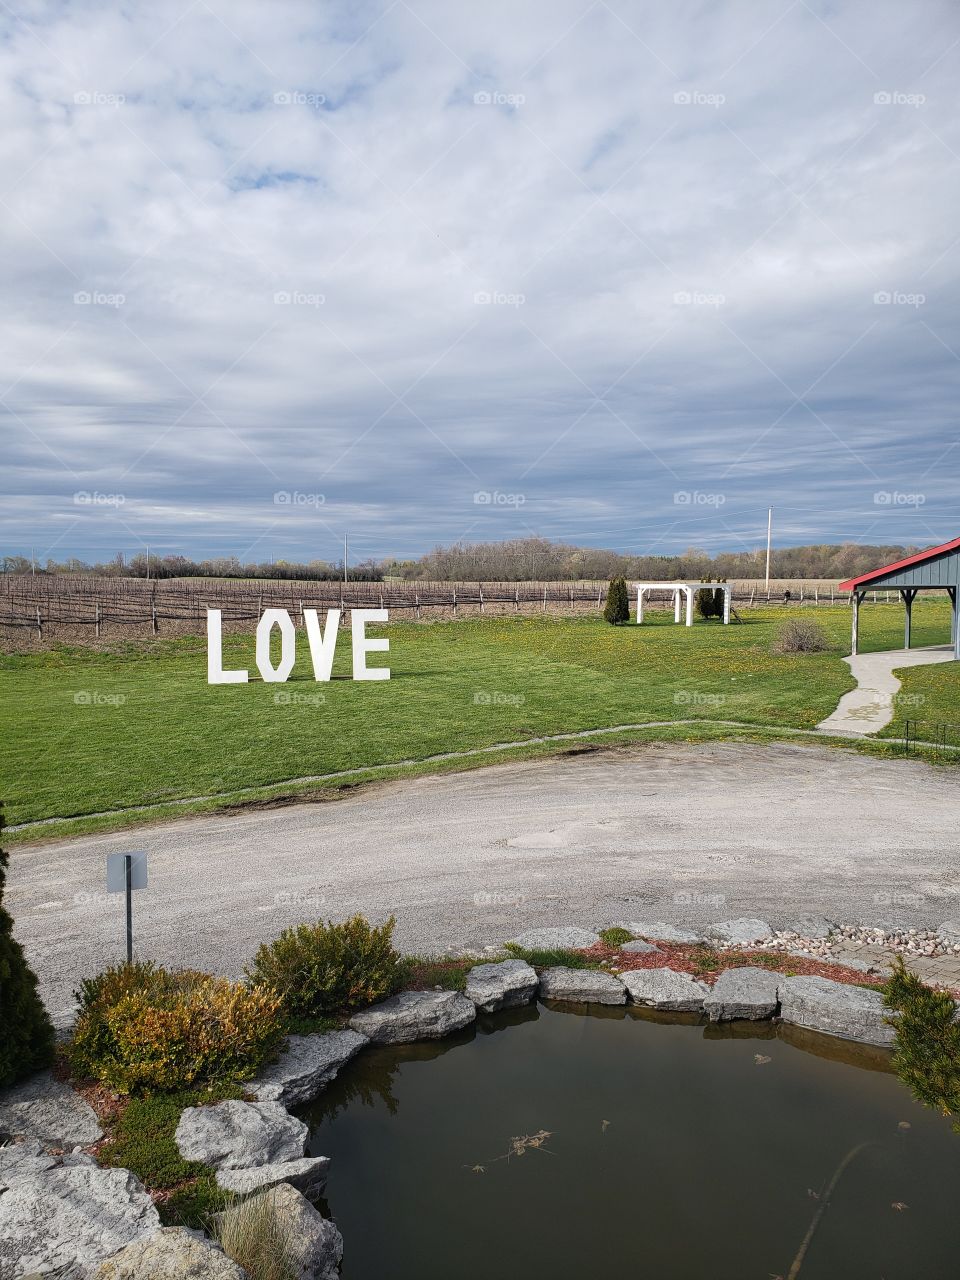 Early evening shot of a "love" sign in the field of a vineyard in Prince Edward County, Niagara.